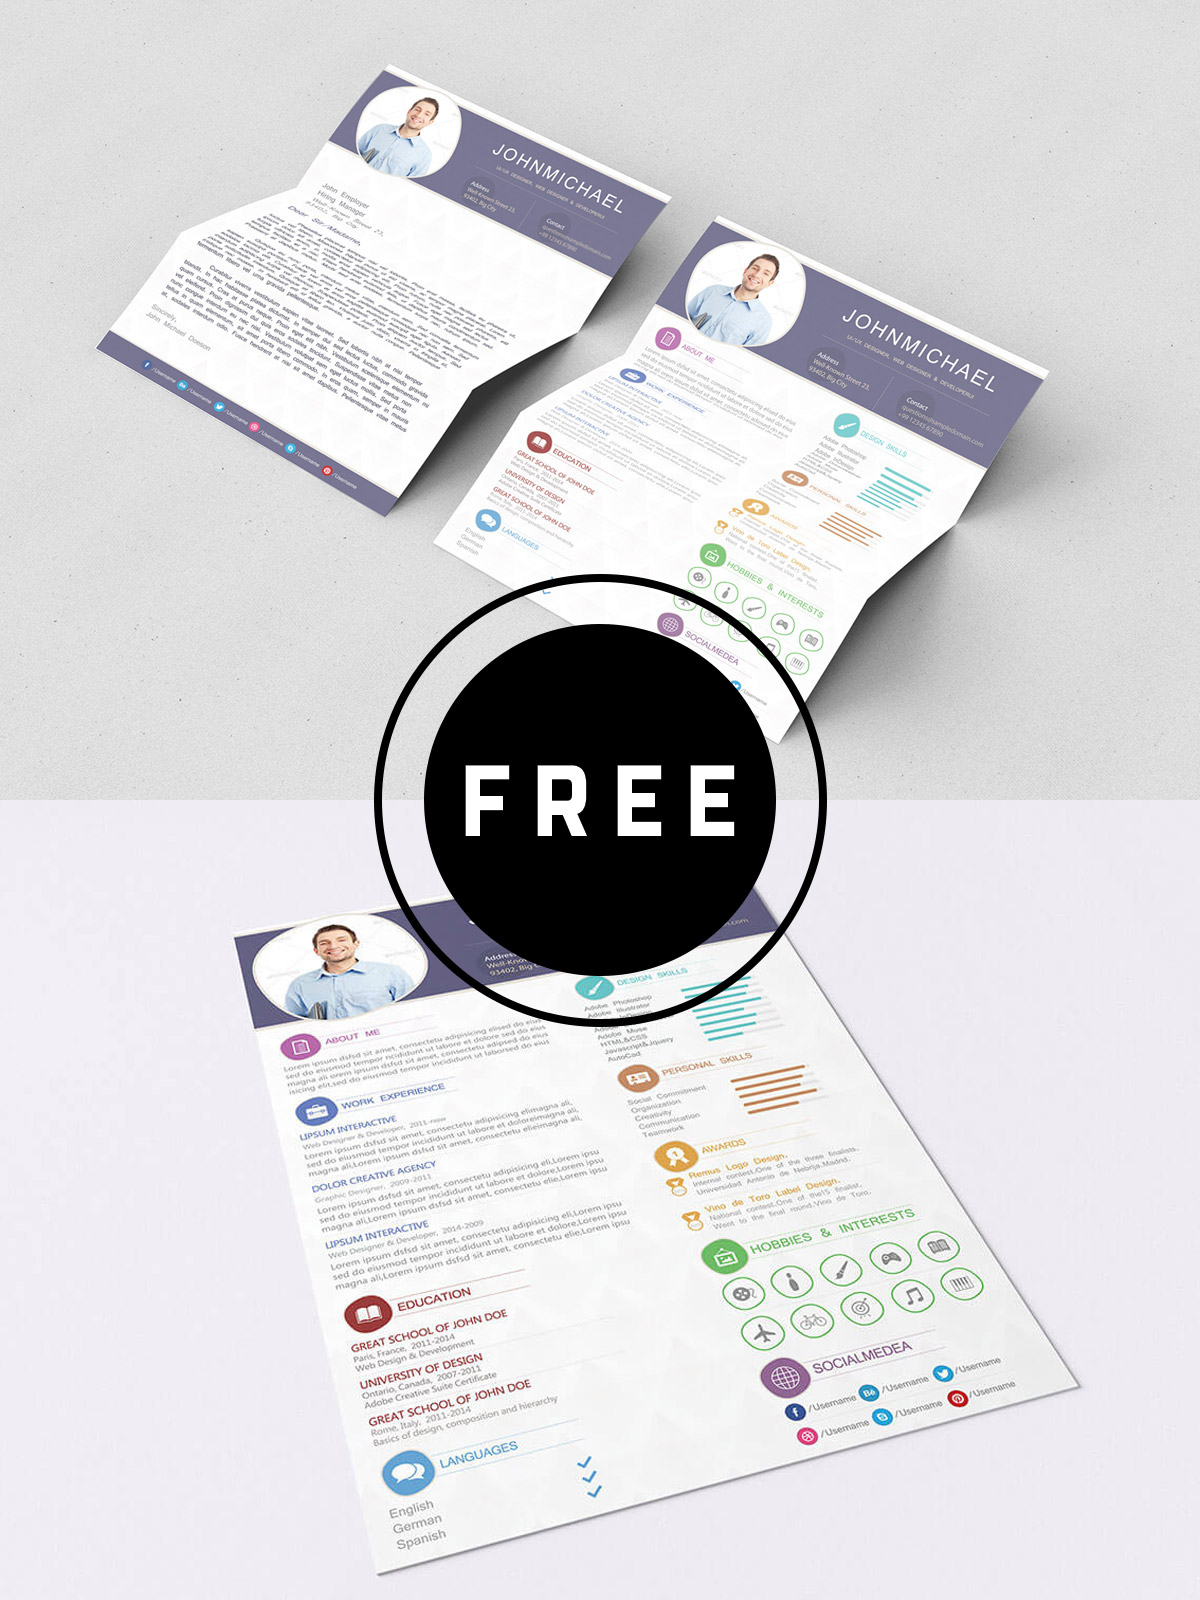 98 Awesome Free Resume Templates for 2019